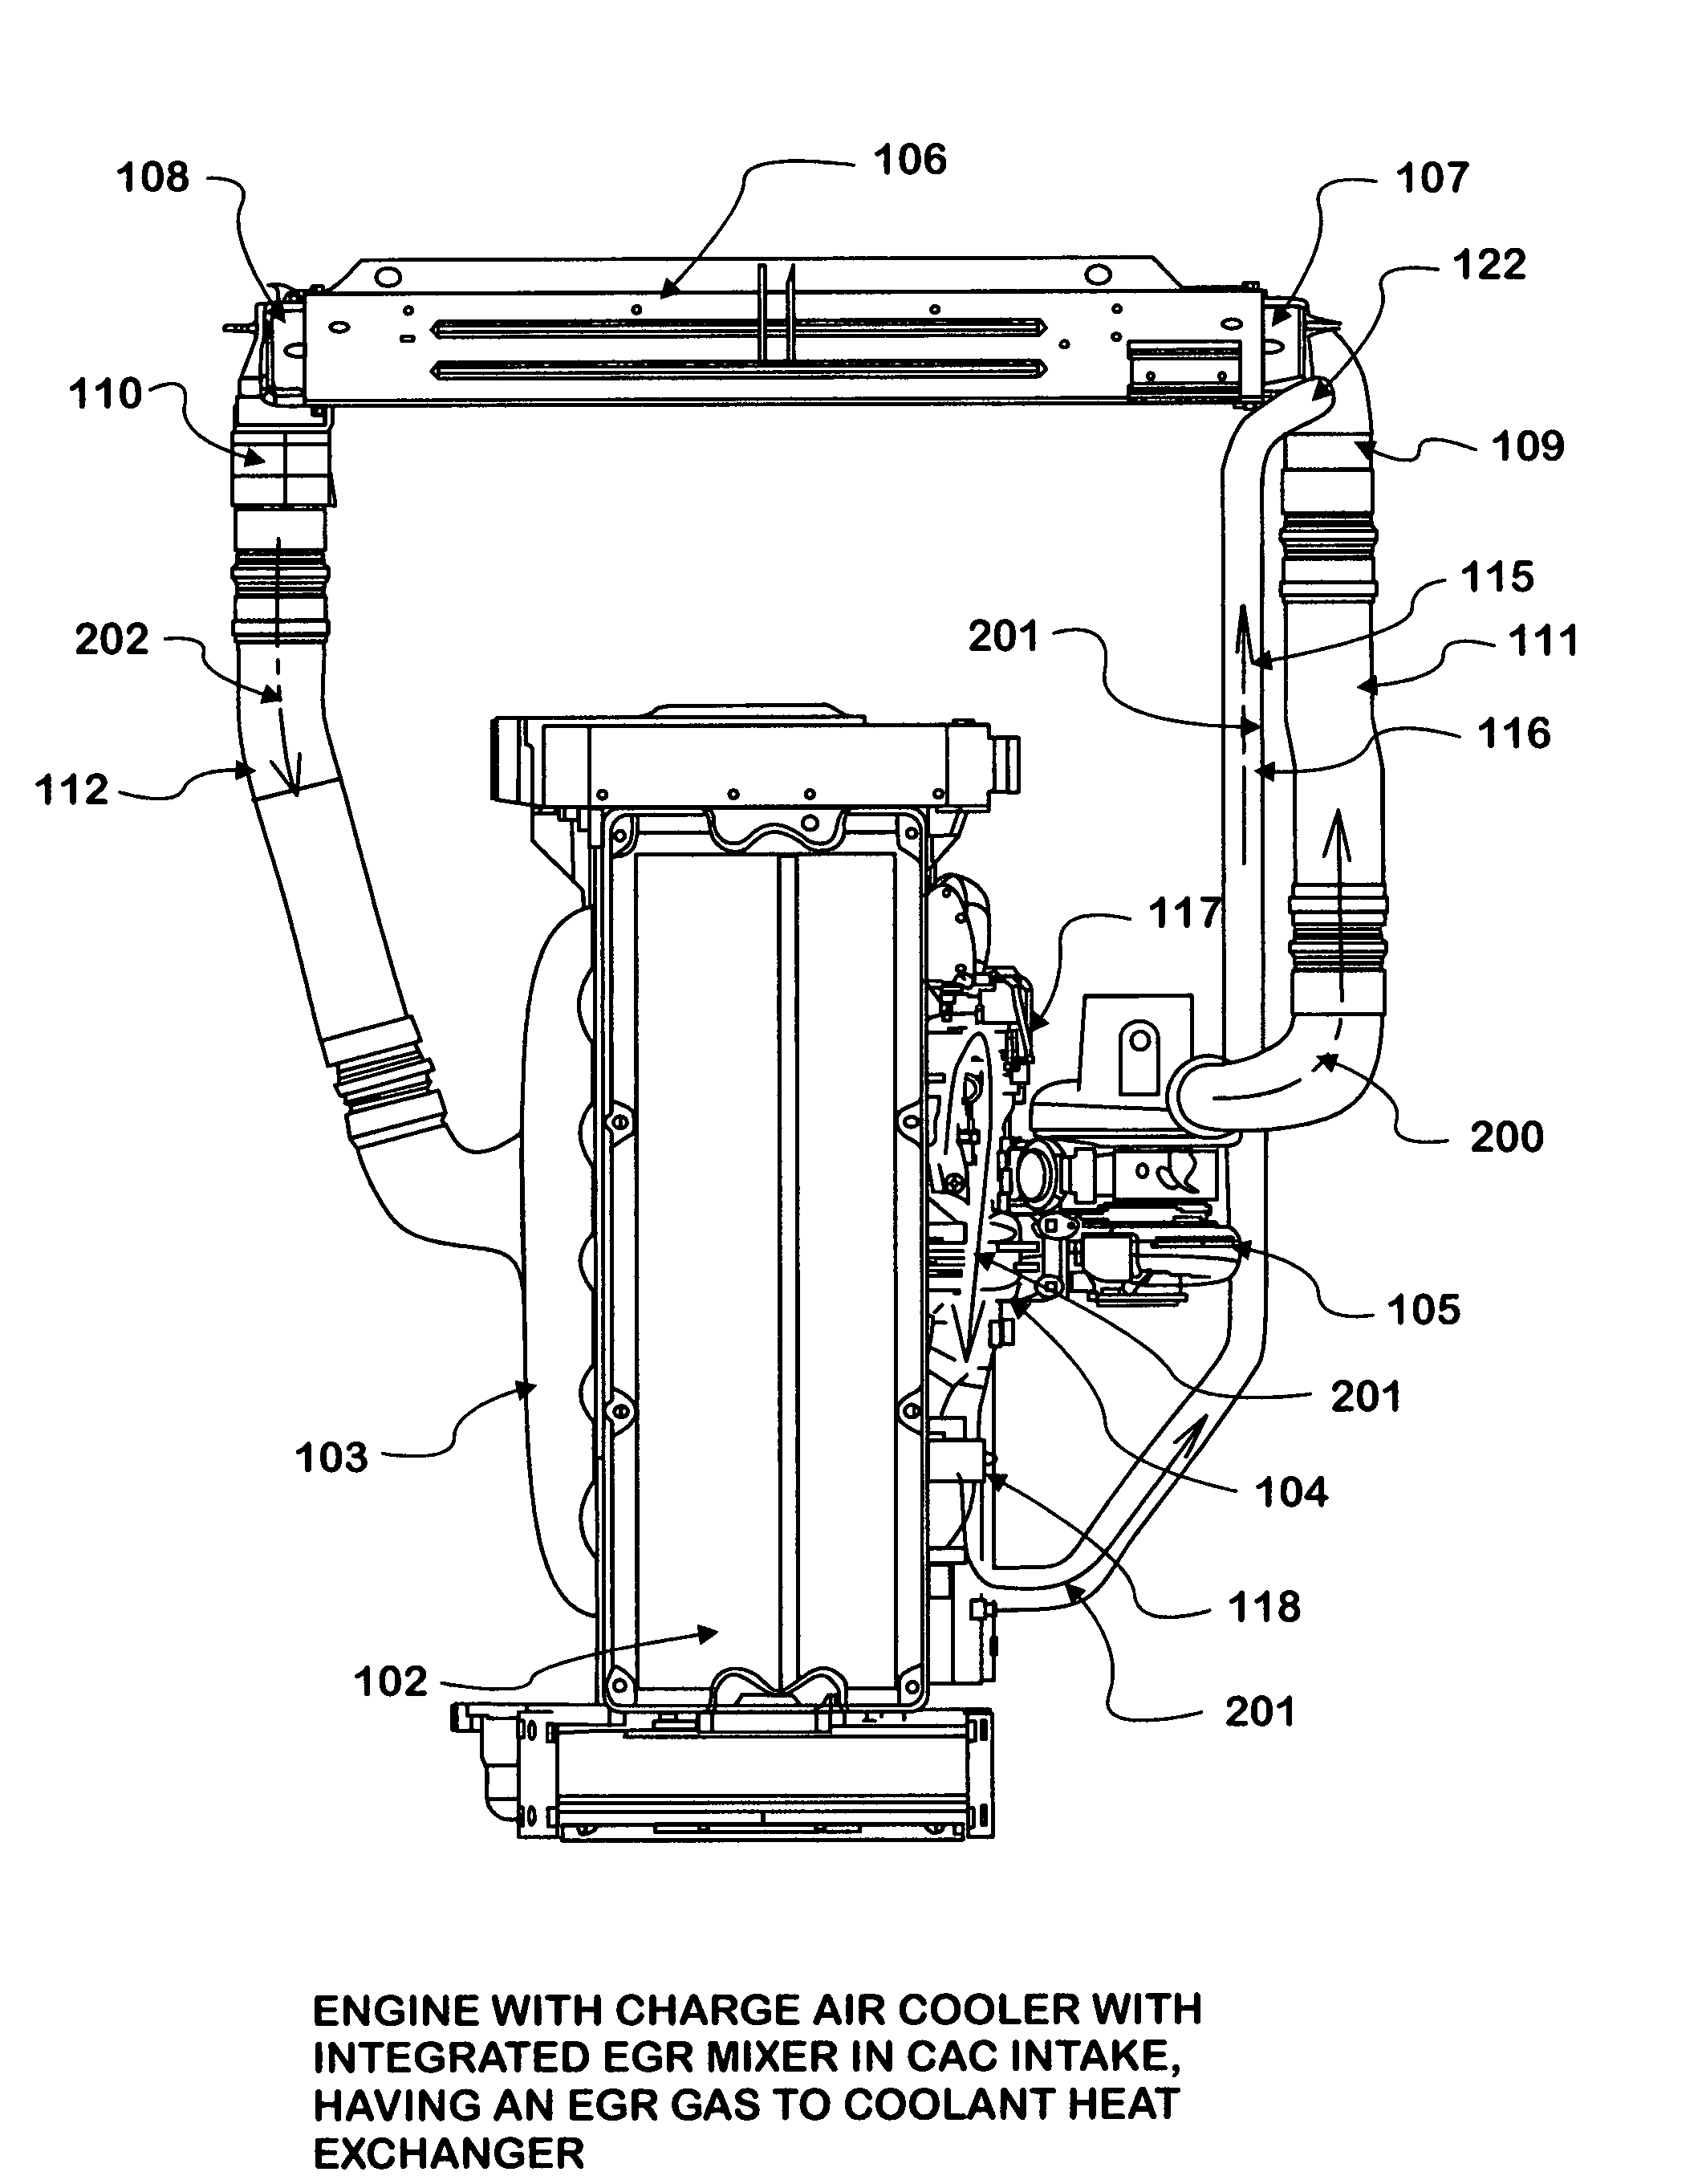 Integrated charge air cooler and exhaust gas recirculation mixer